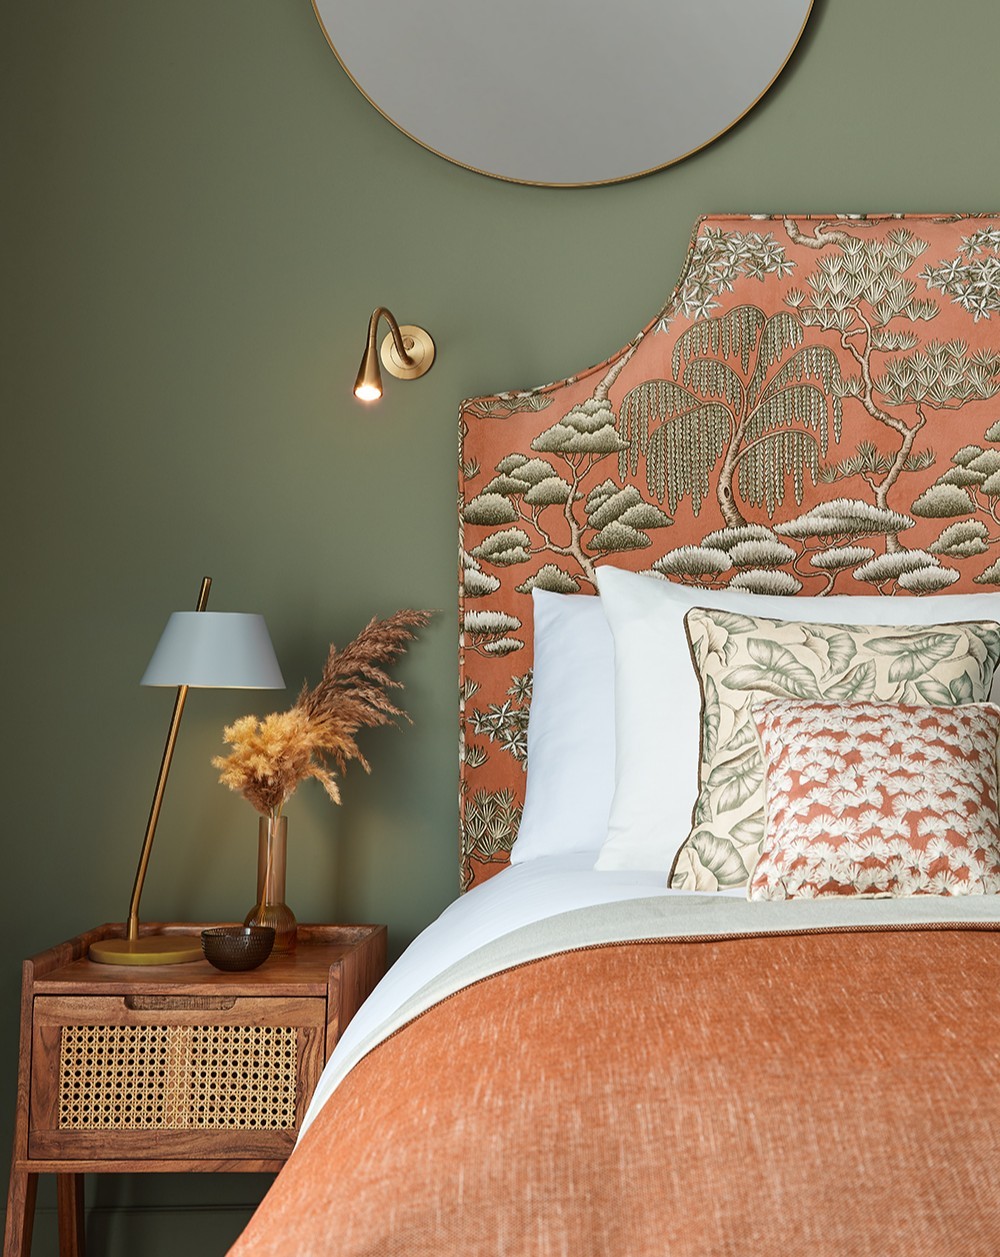 an upholstered headboard using textured fabric can bring warmth and visual depth to a bedroom decor instantly